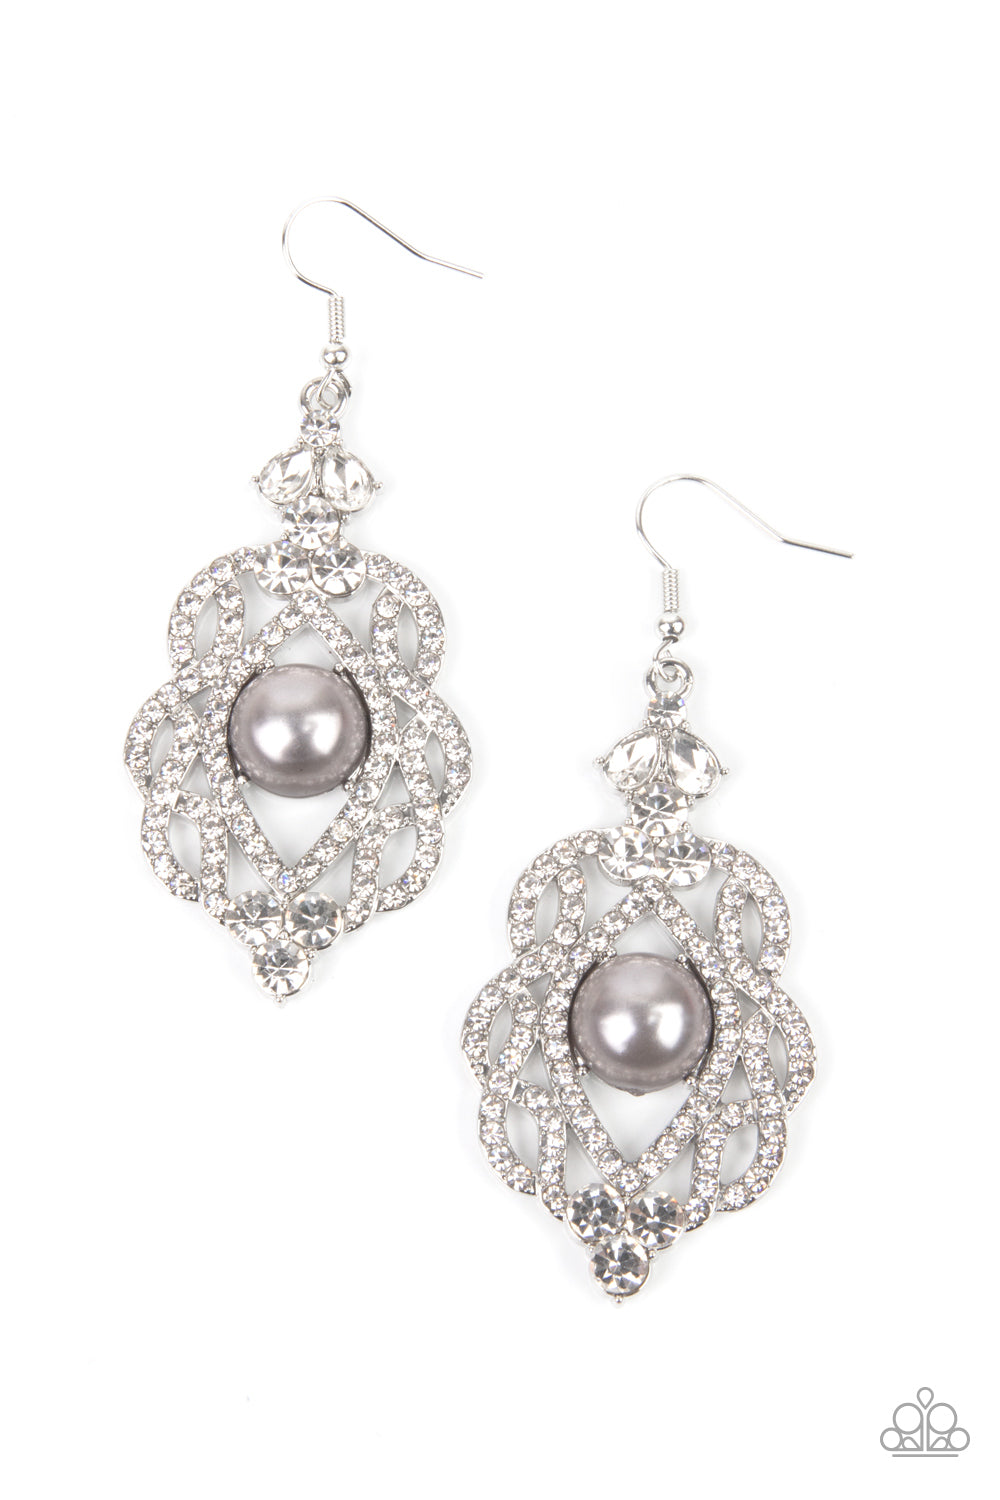 Rhinestone Renaissance - Silver ***COMING SOON*** - Bling With Crystal